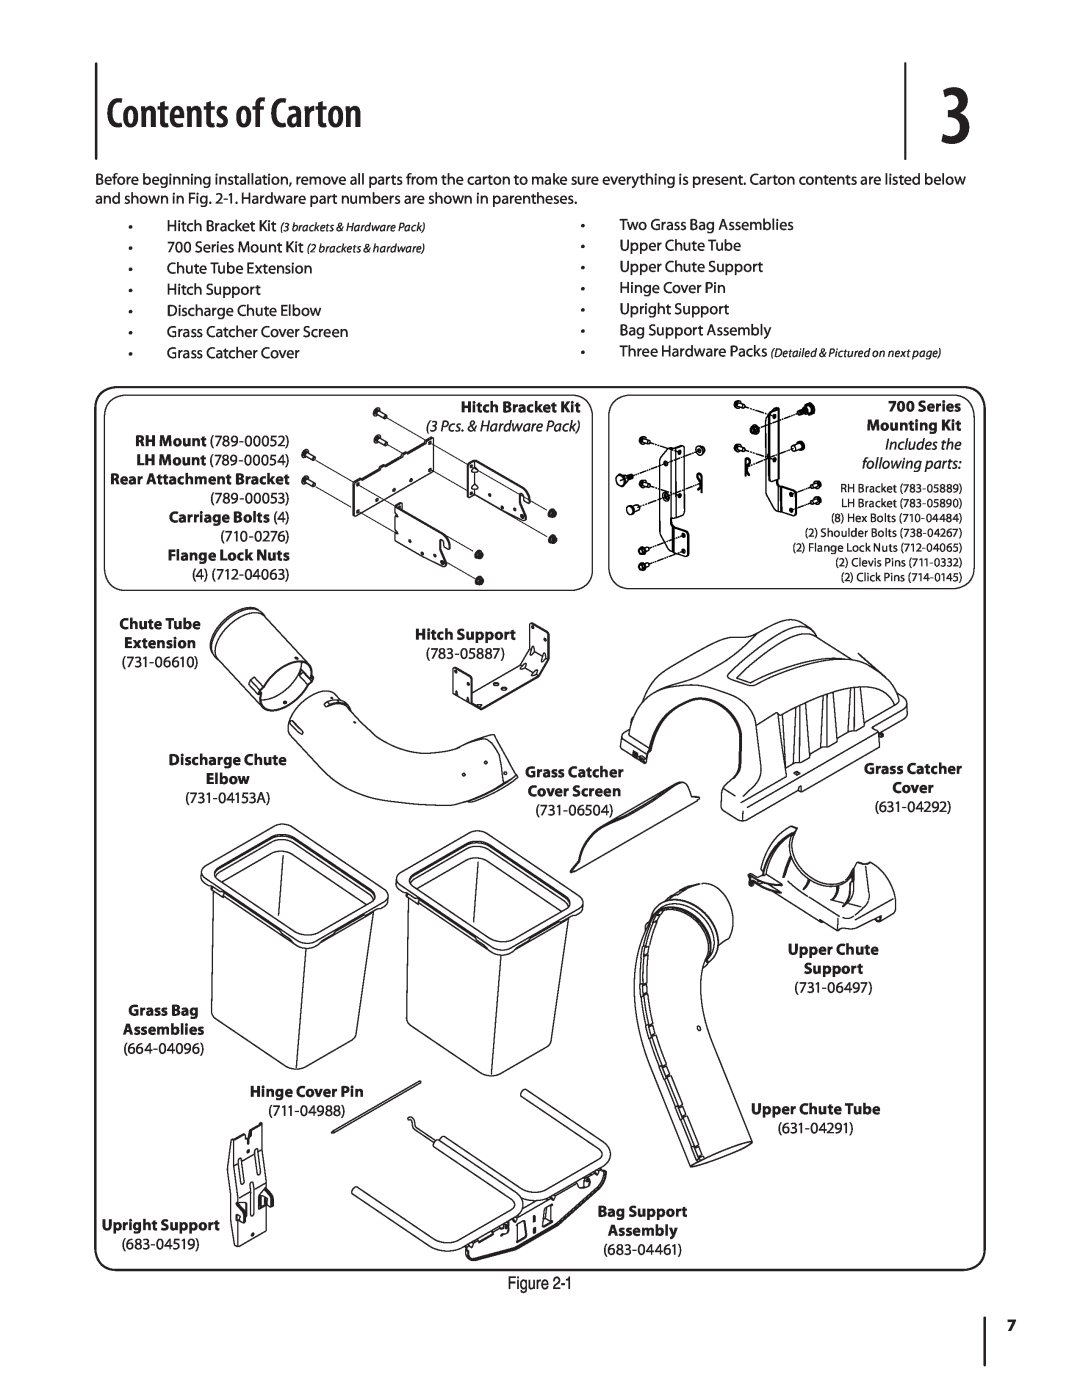 MTD 19A30002000 manual Contents of Carton, Rear Attachment Bracket, Carriage Bolts, Flange Lock Nuts, Chute Tube Extension 